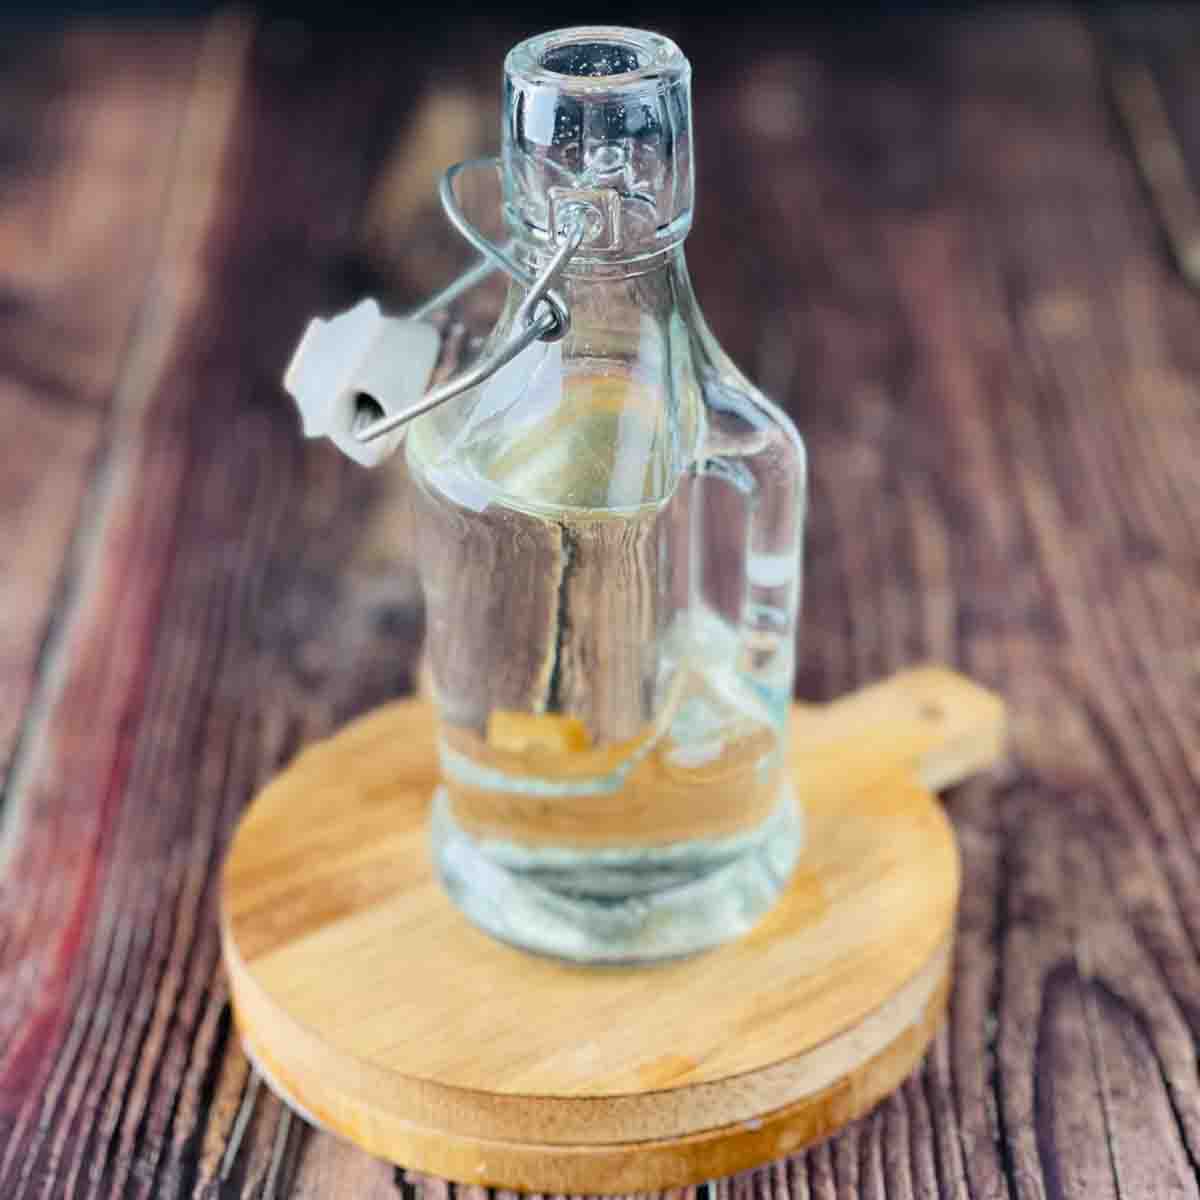 A bottle of homemade vanilla simple syrup on wooden coasters.